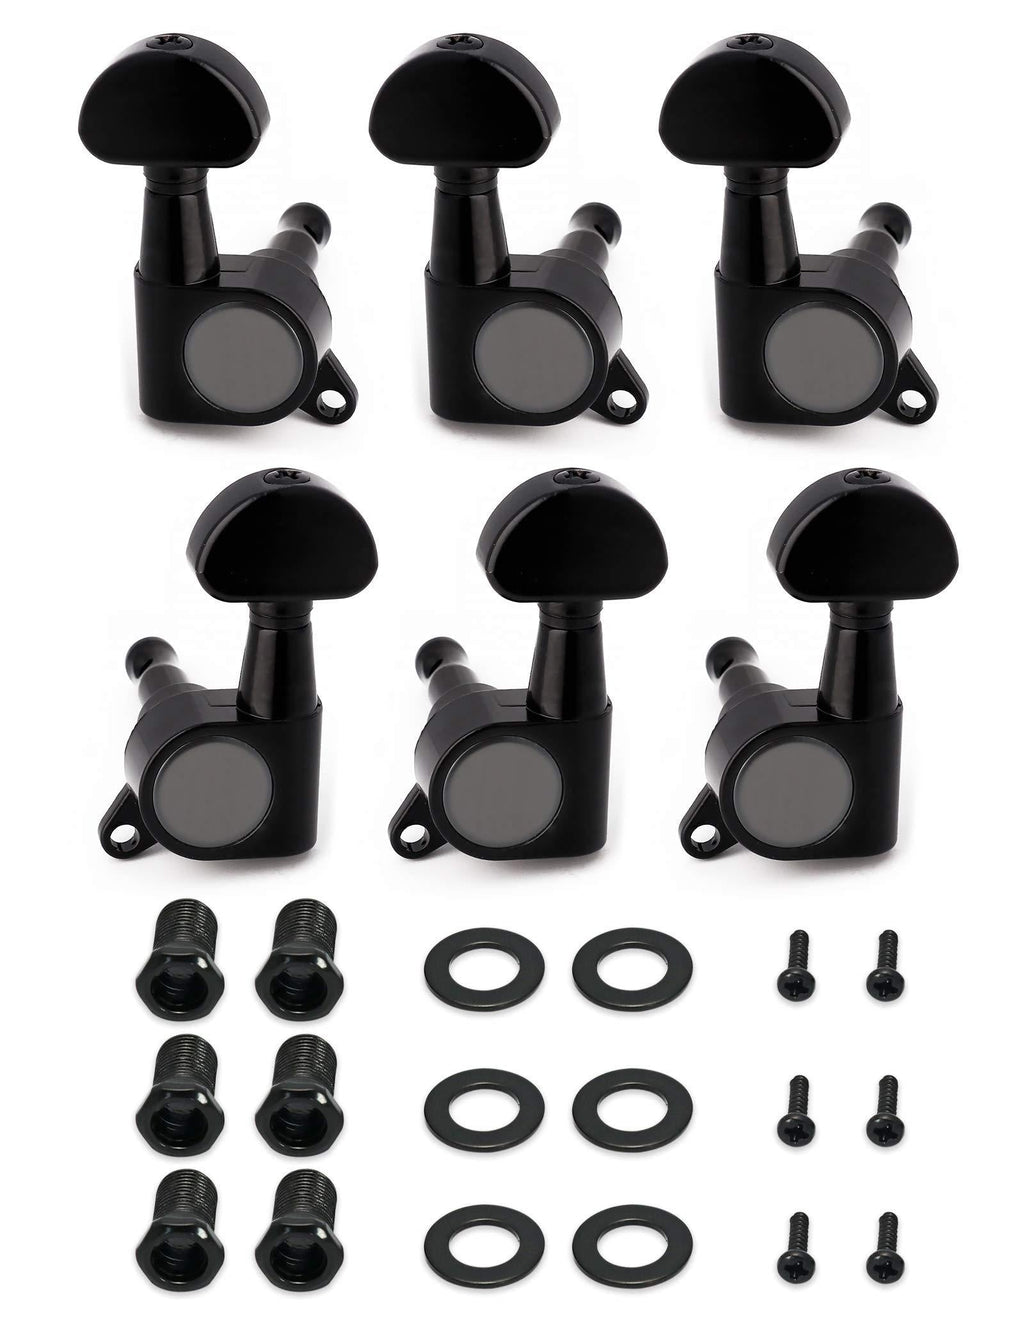 Holmer Sealed String Tuning Pegs Tuning Keys Machine Heads Tuners for Electric Guitar or Acoustic Guitar 3 Left 3Right Black.